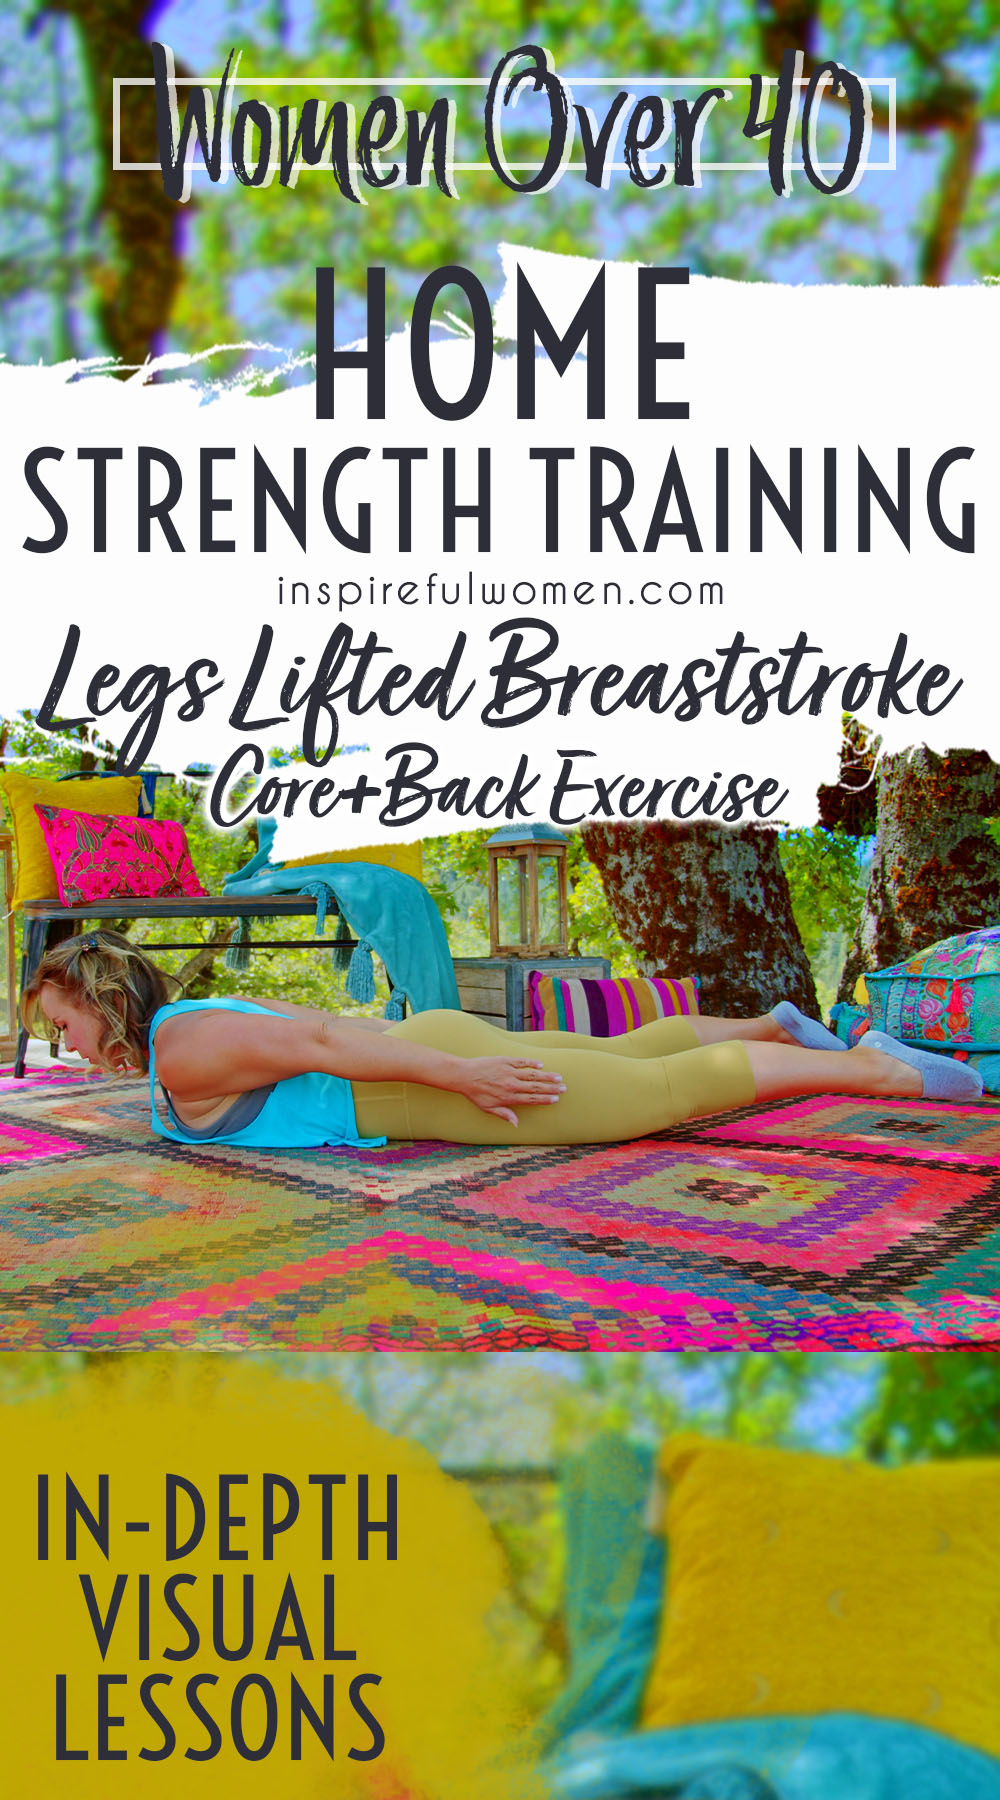 breaststroke-legs-lifted-floor-pilates-core-exercise-thoracic-erector-spinal-women-40+